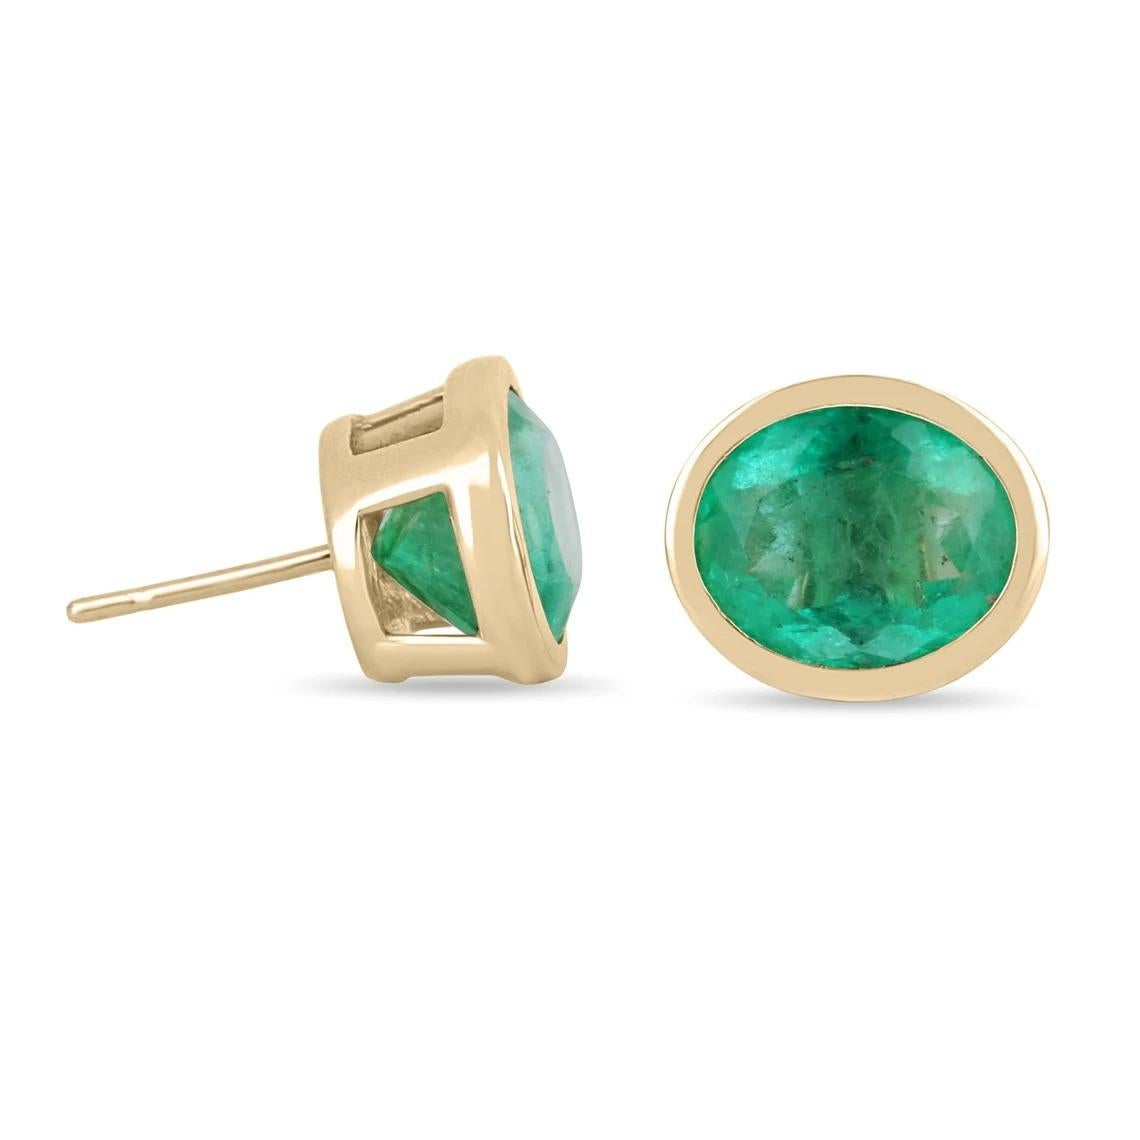 Displayed are gorgeous bezel set natural oval Colombian emeralds yellow gold bezel statement studs in solid 14K. Make a stylish statement with these beauties. These 14k gold stud earrings are handmade by our expert jeweler and sparkle with an